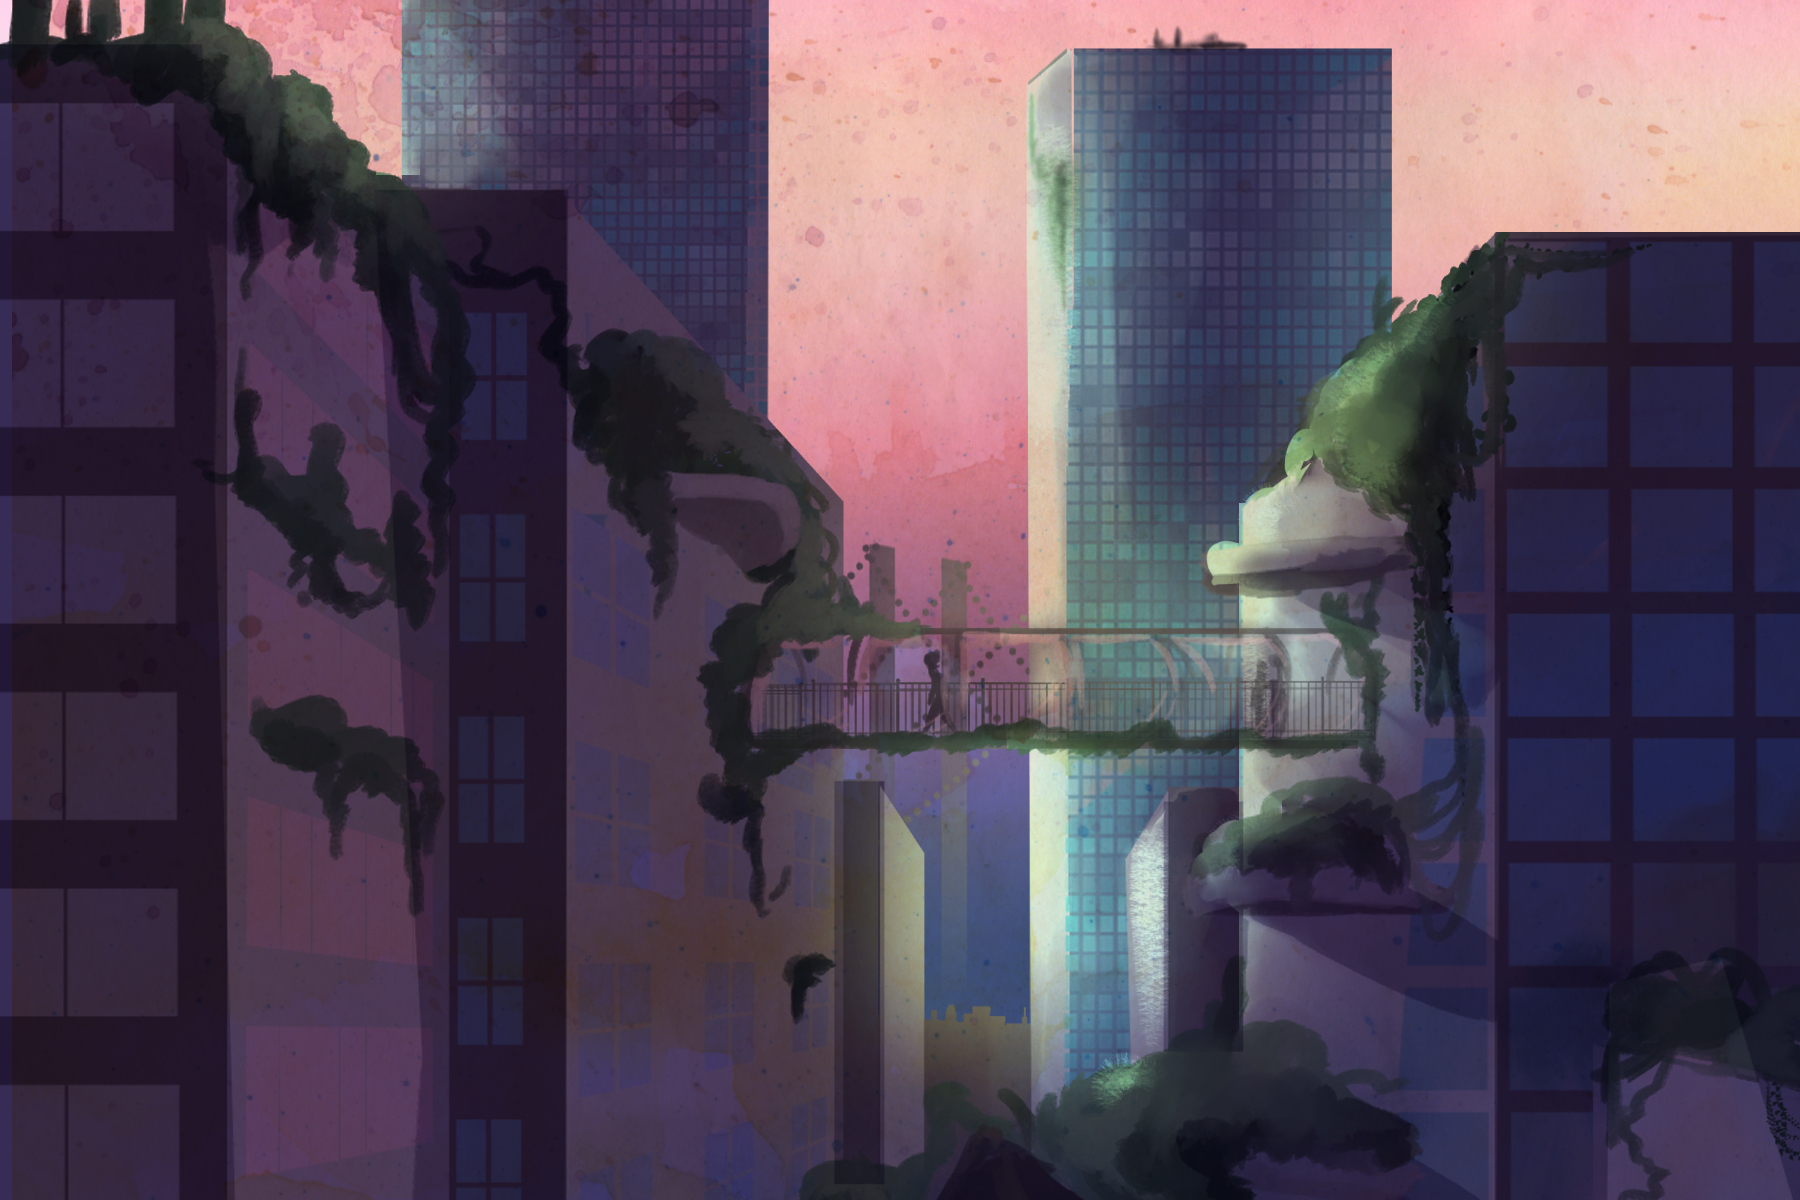 In an article about eco-friendly architecture, a city decorated with plants and moss sits against a pink sunset sky.